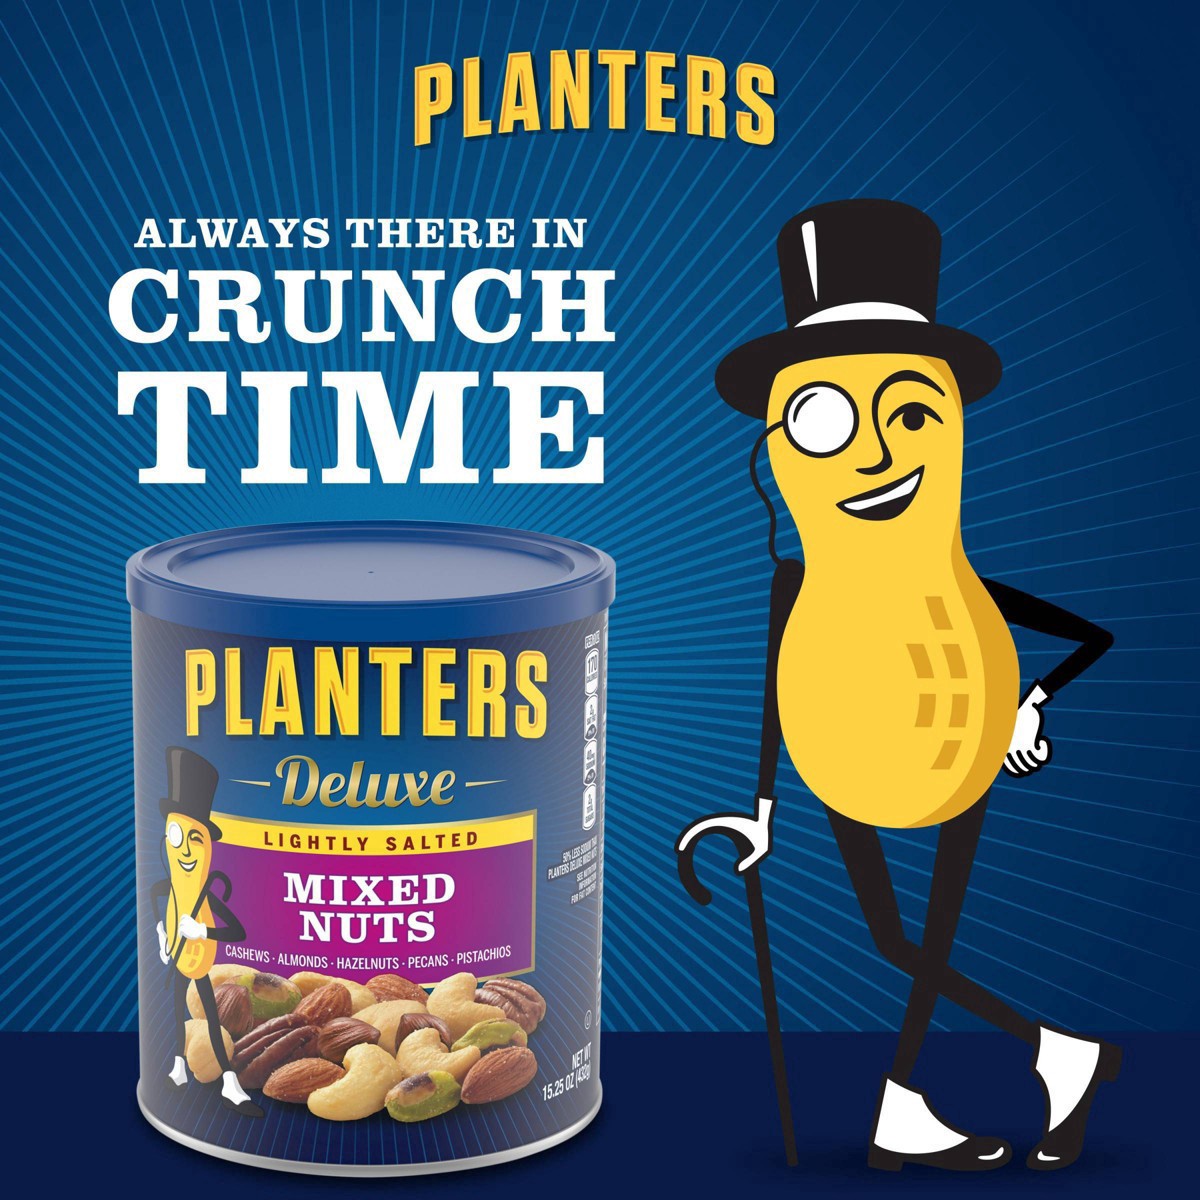 slide 8 of 46, Planters Deluxe Lightly Salted Mixed Nuts 15.25 oz, 15.25 oz